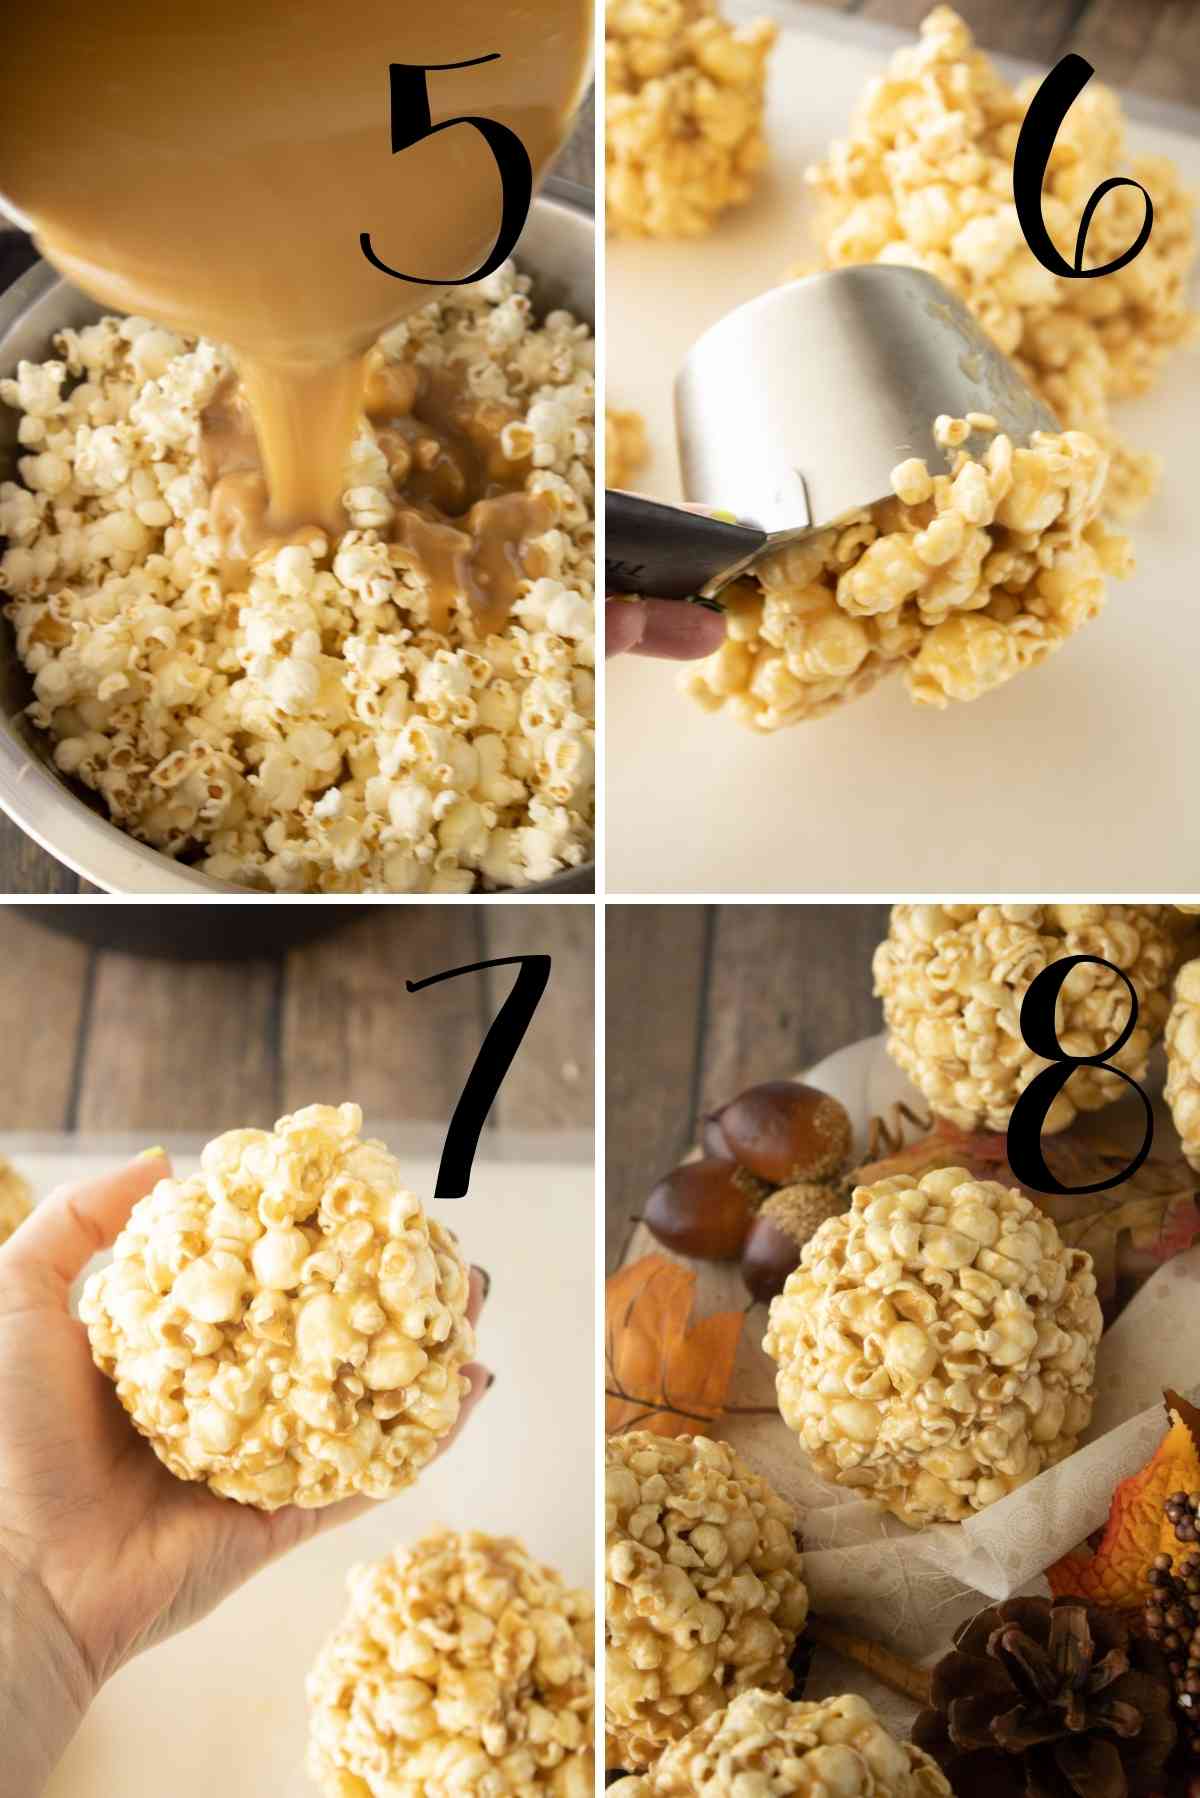 Pour the caramel over the popcorn and shape the popcorn mixture into homemade caramel popcorn balls!